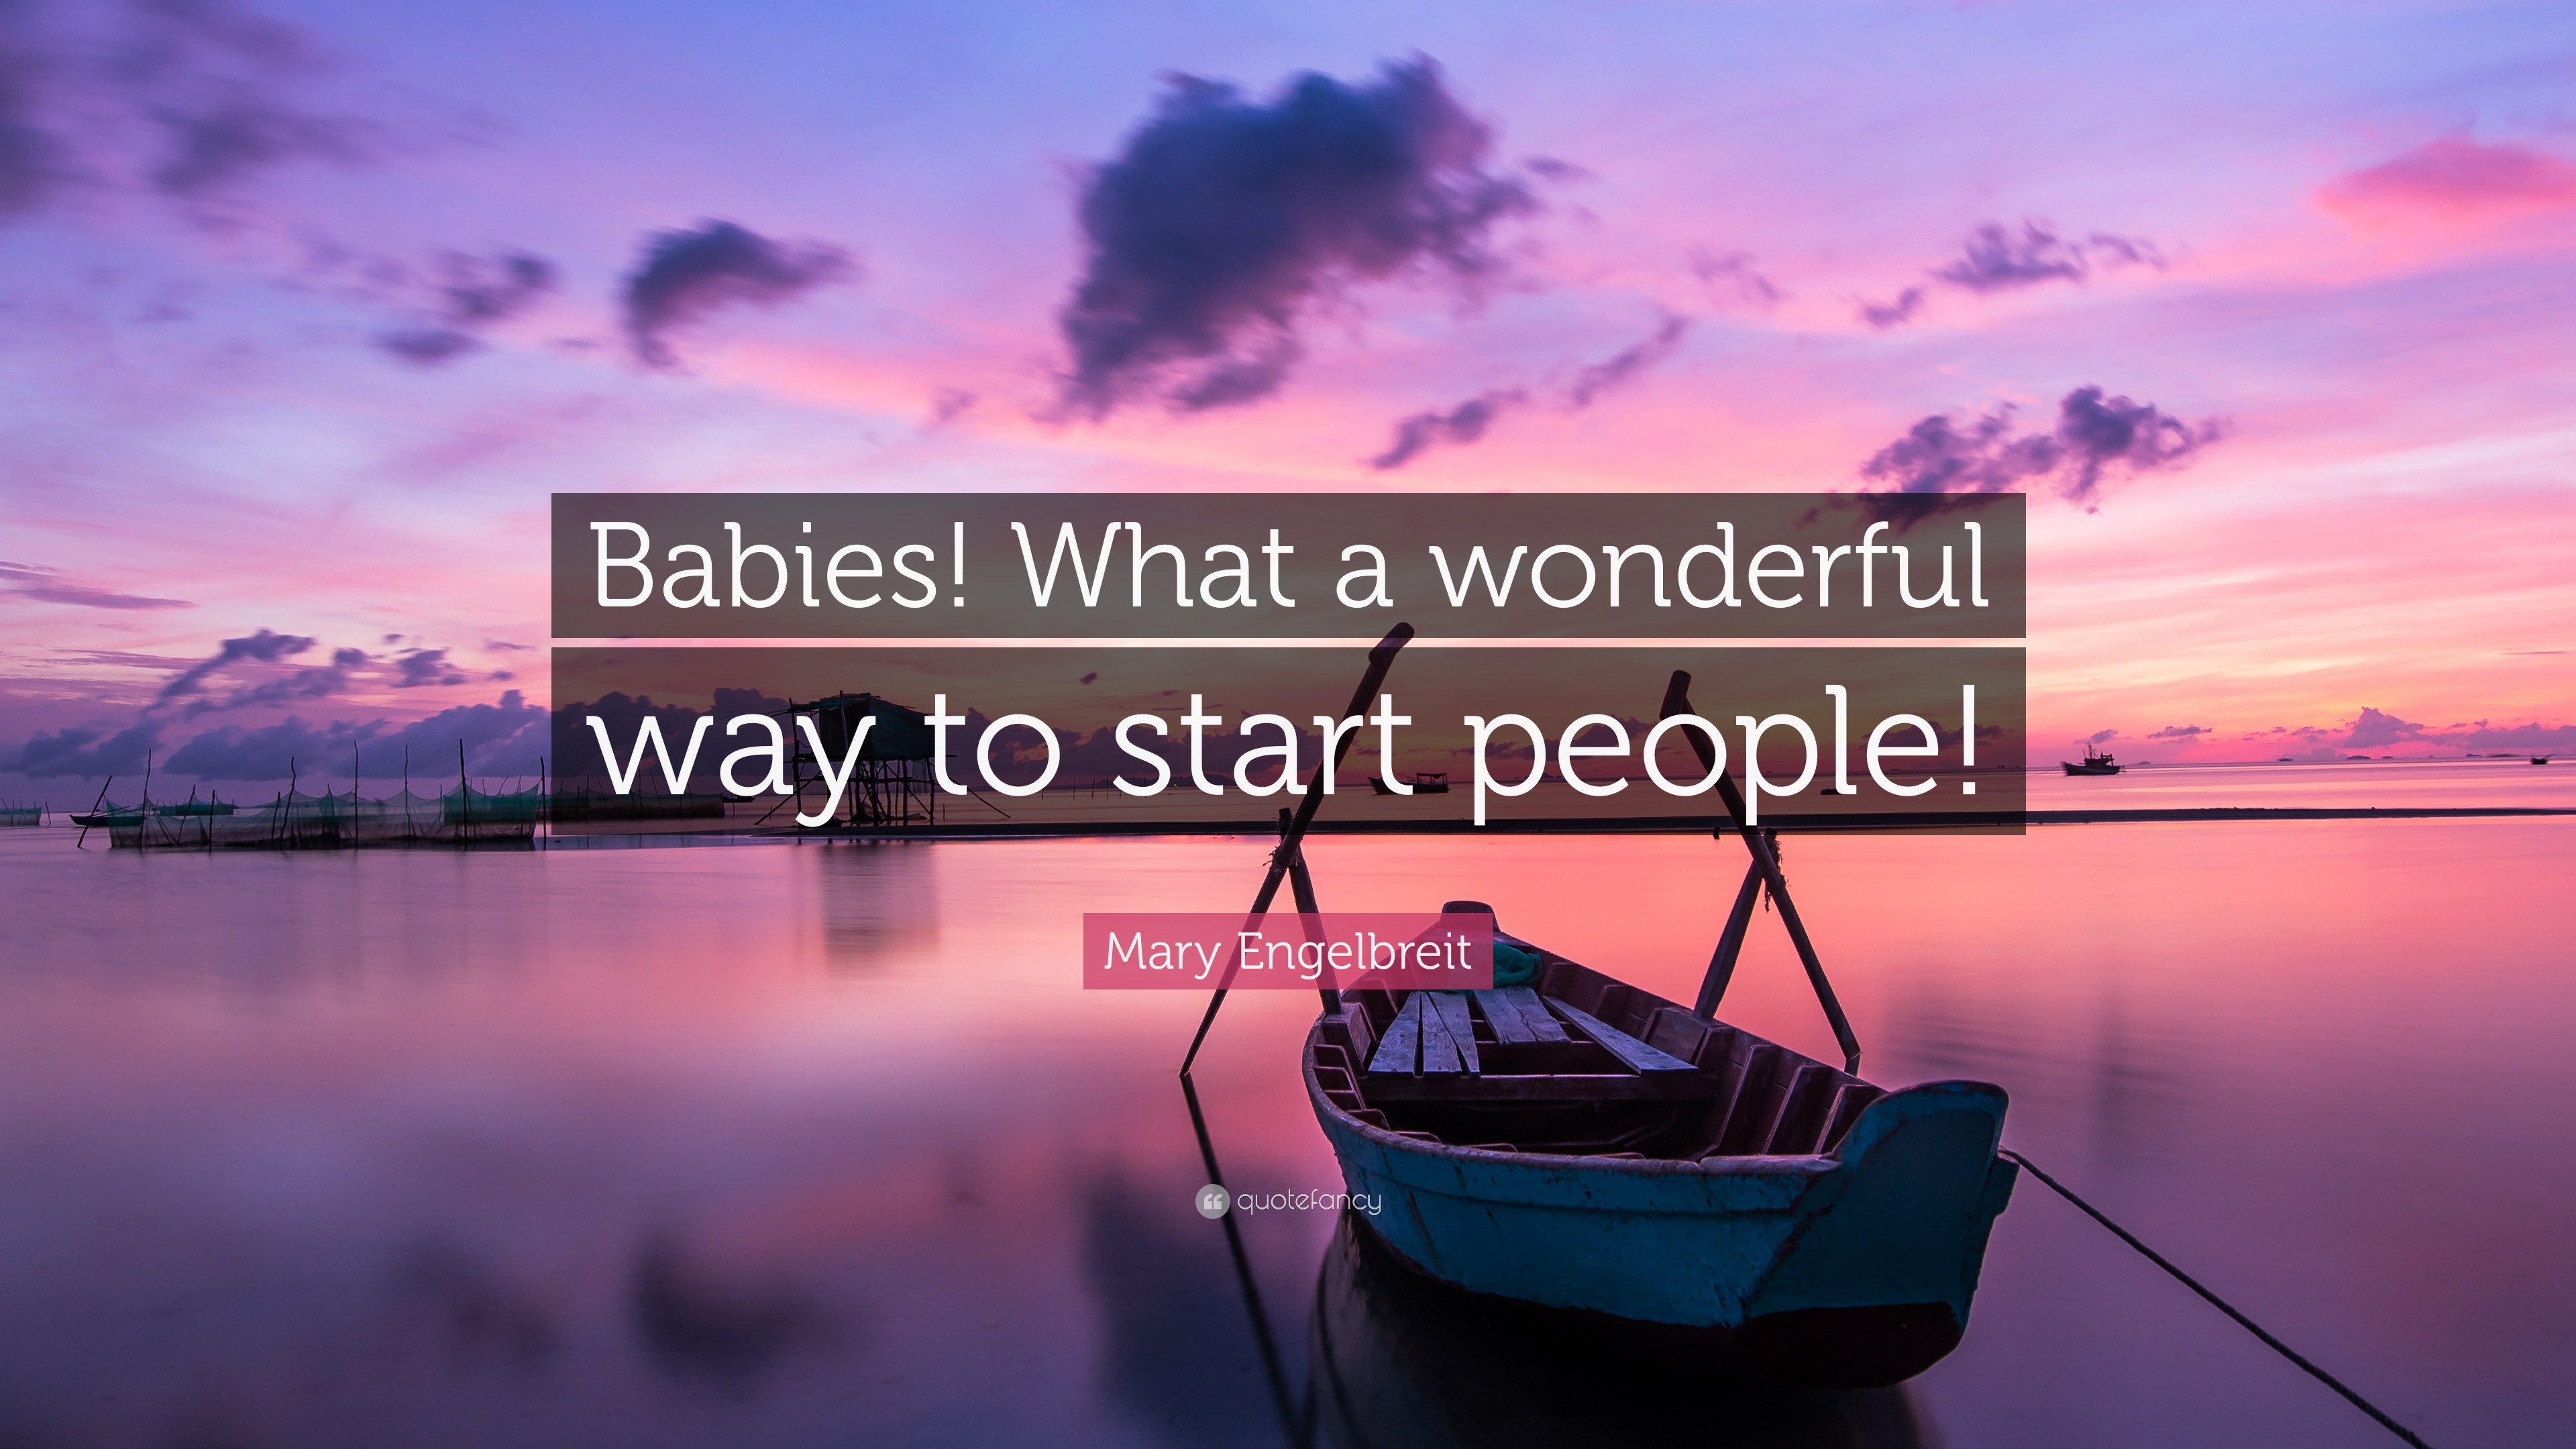 3840x2160 Mary Engelbreit Quote: “Babies! What a wonderful way to start people!”